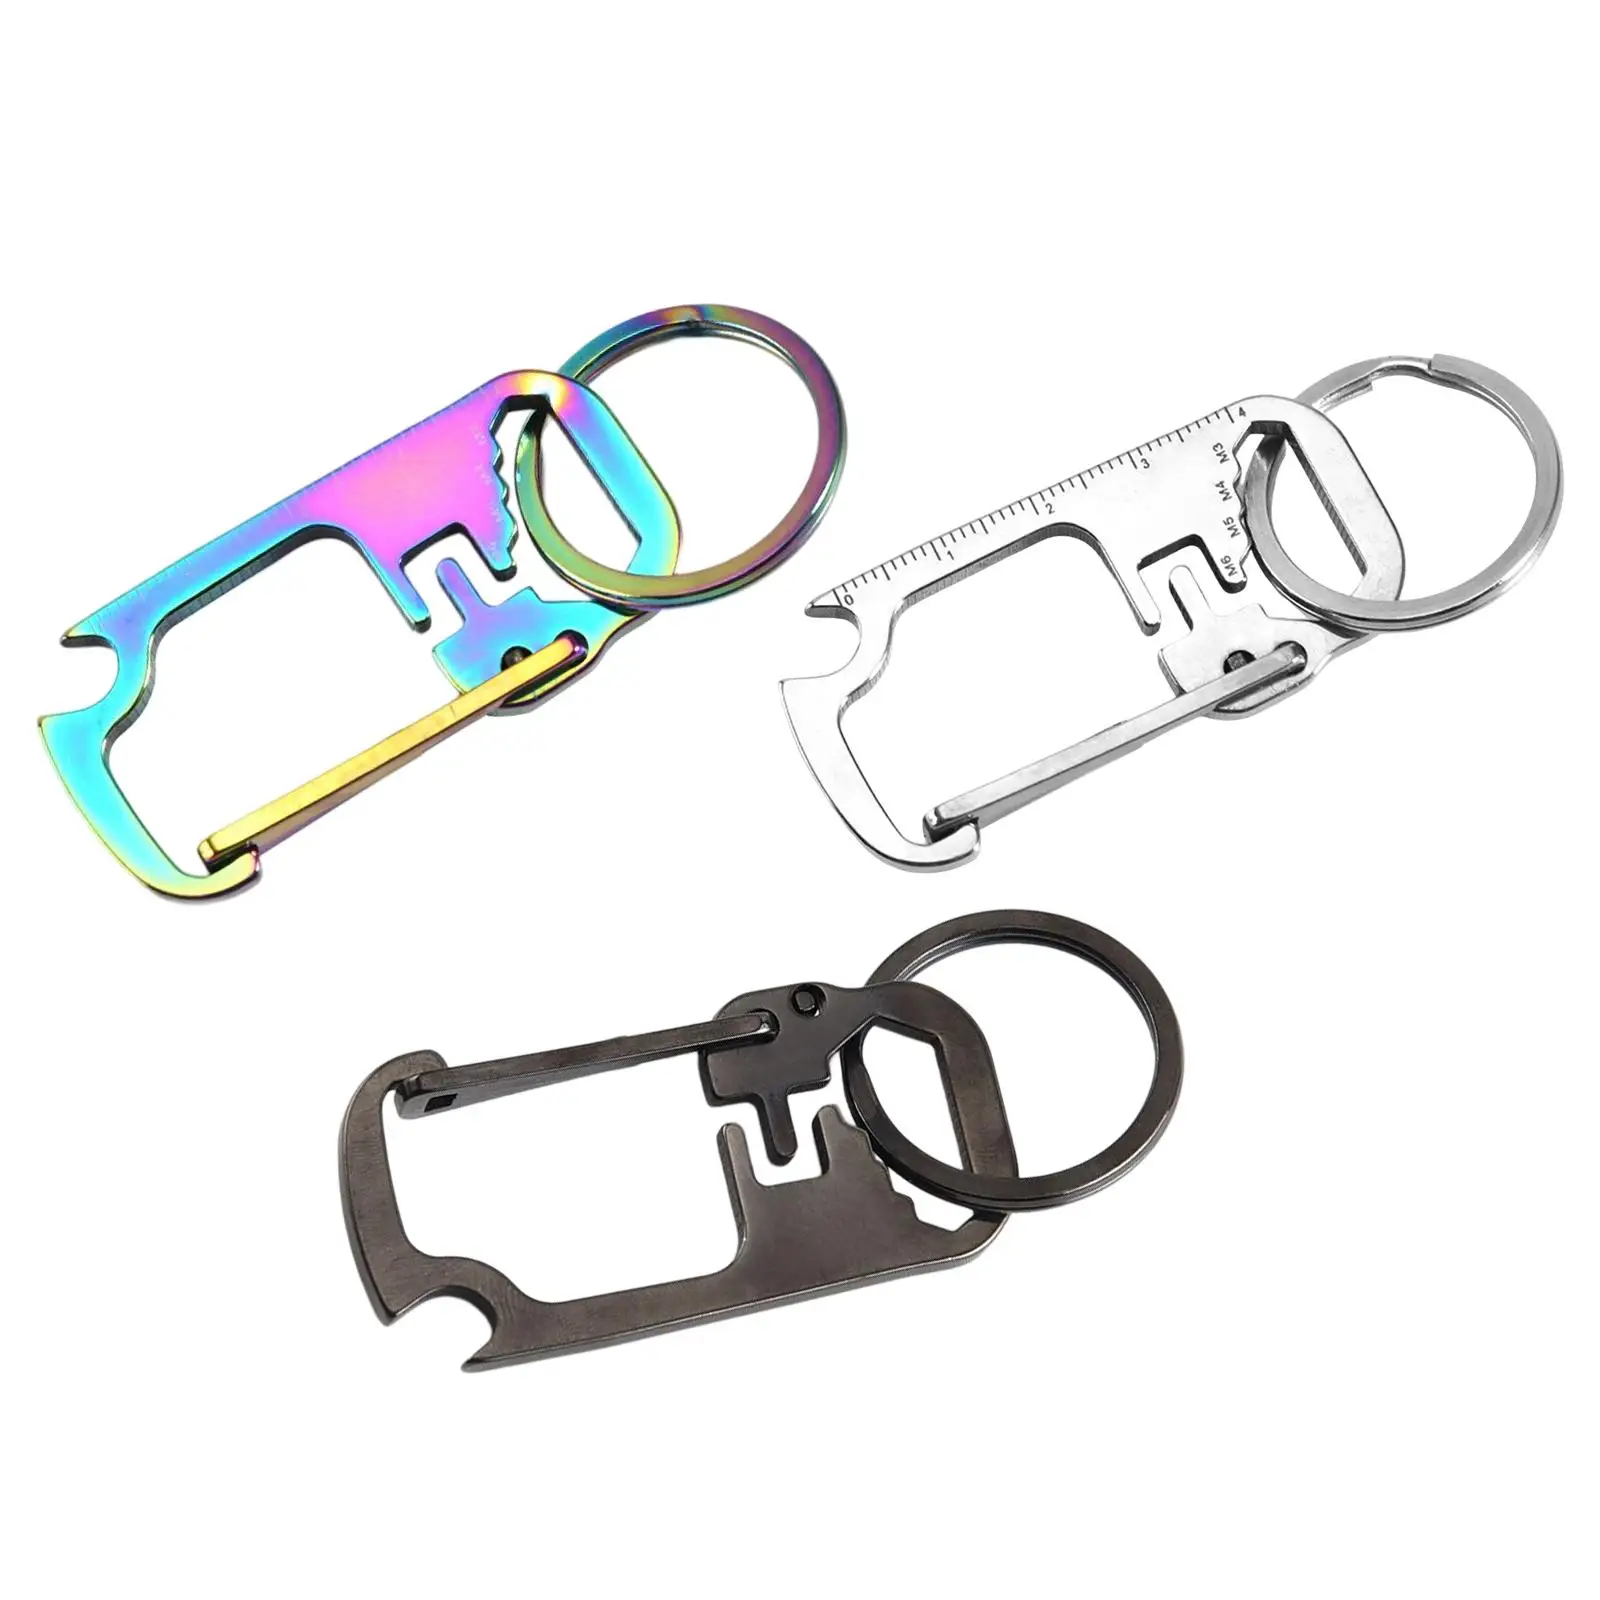 Multifunctional Keychains Multitool Precision Miniature Pocket Tool Gifts Fashion for Birthday Jewelry Making Backpacking Hiking